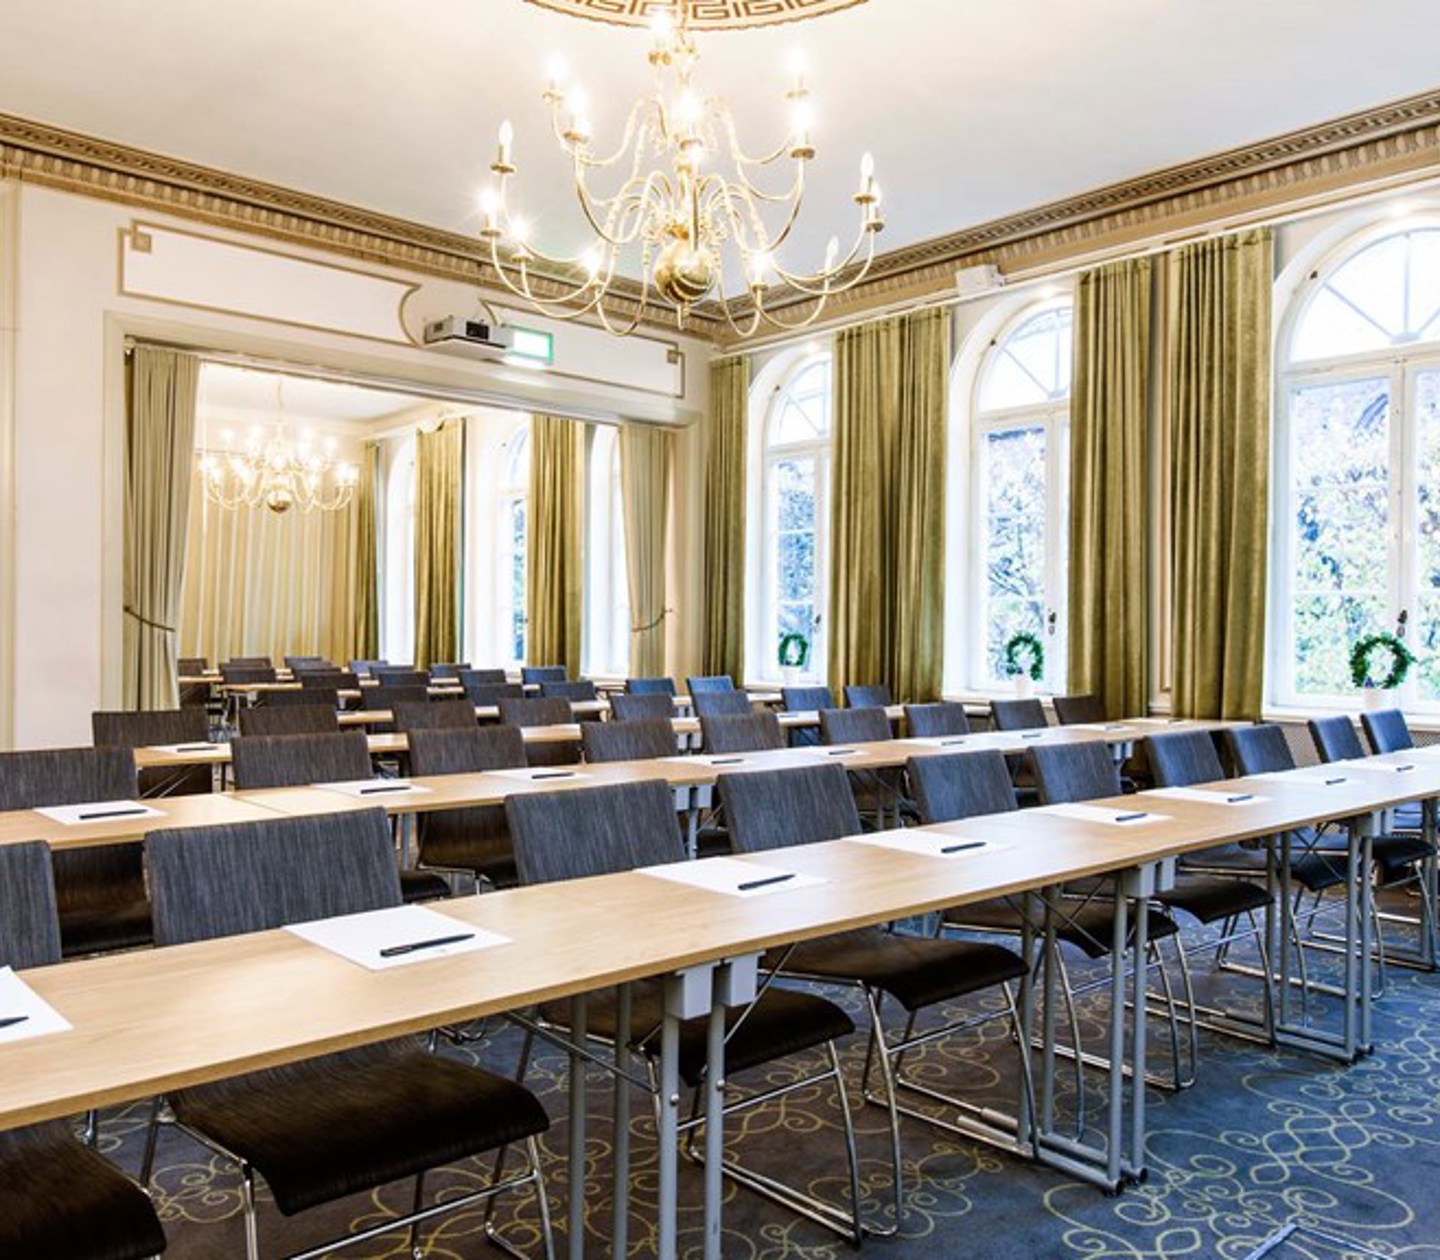 Conference room with lined up chairs, tables gold details and large windows